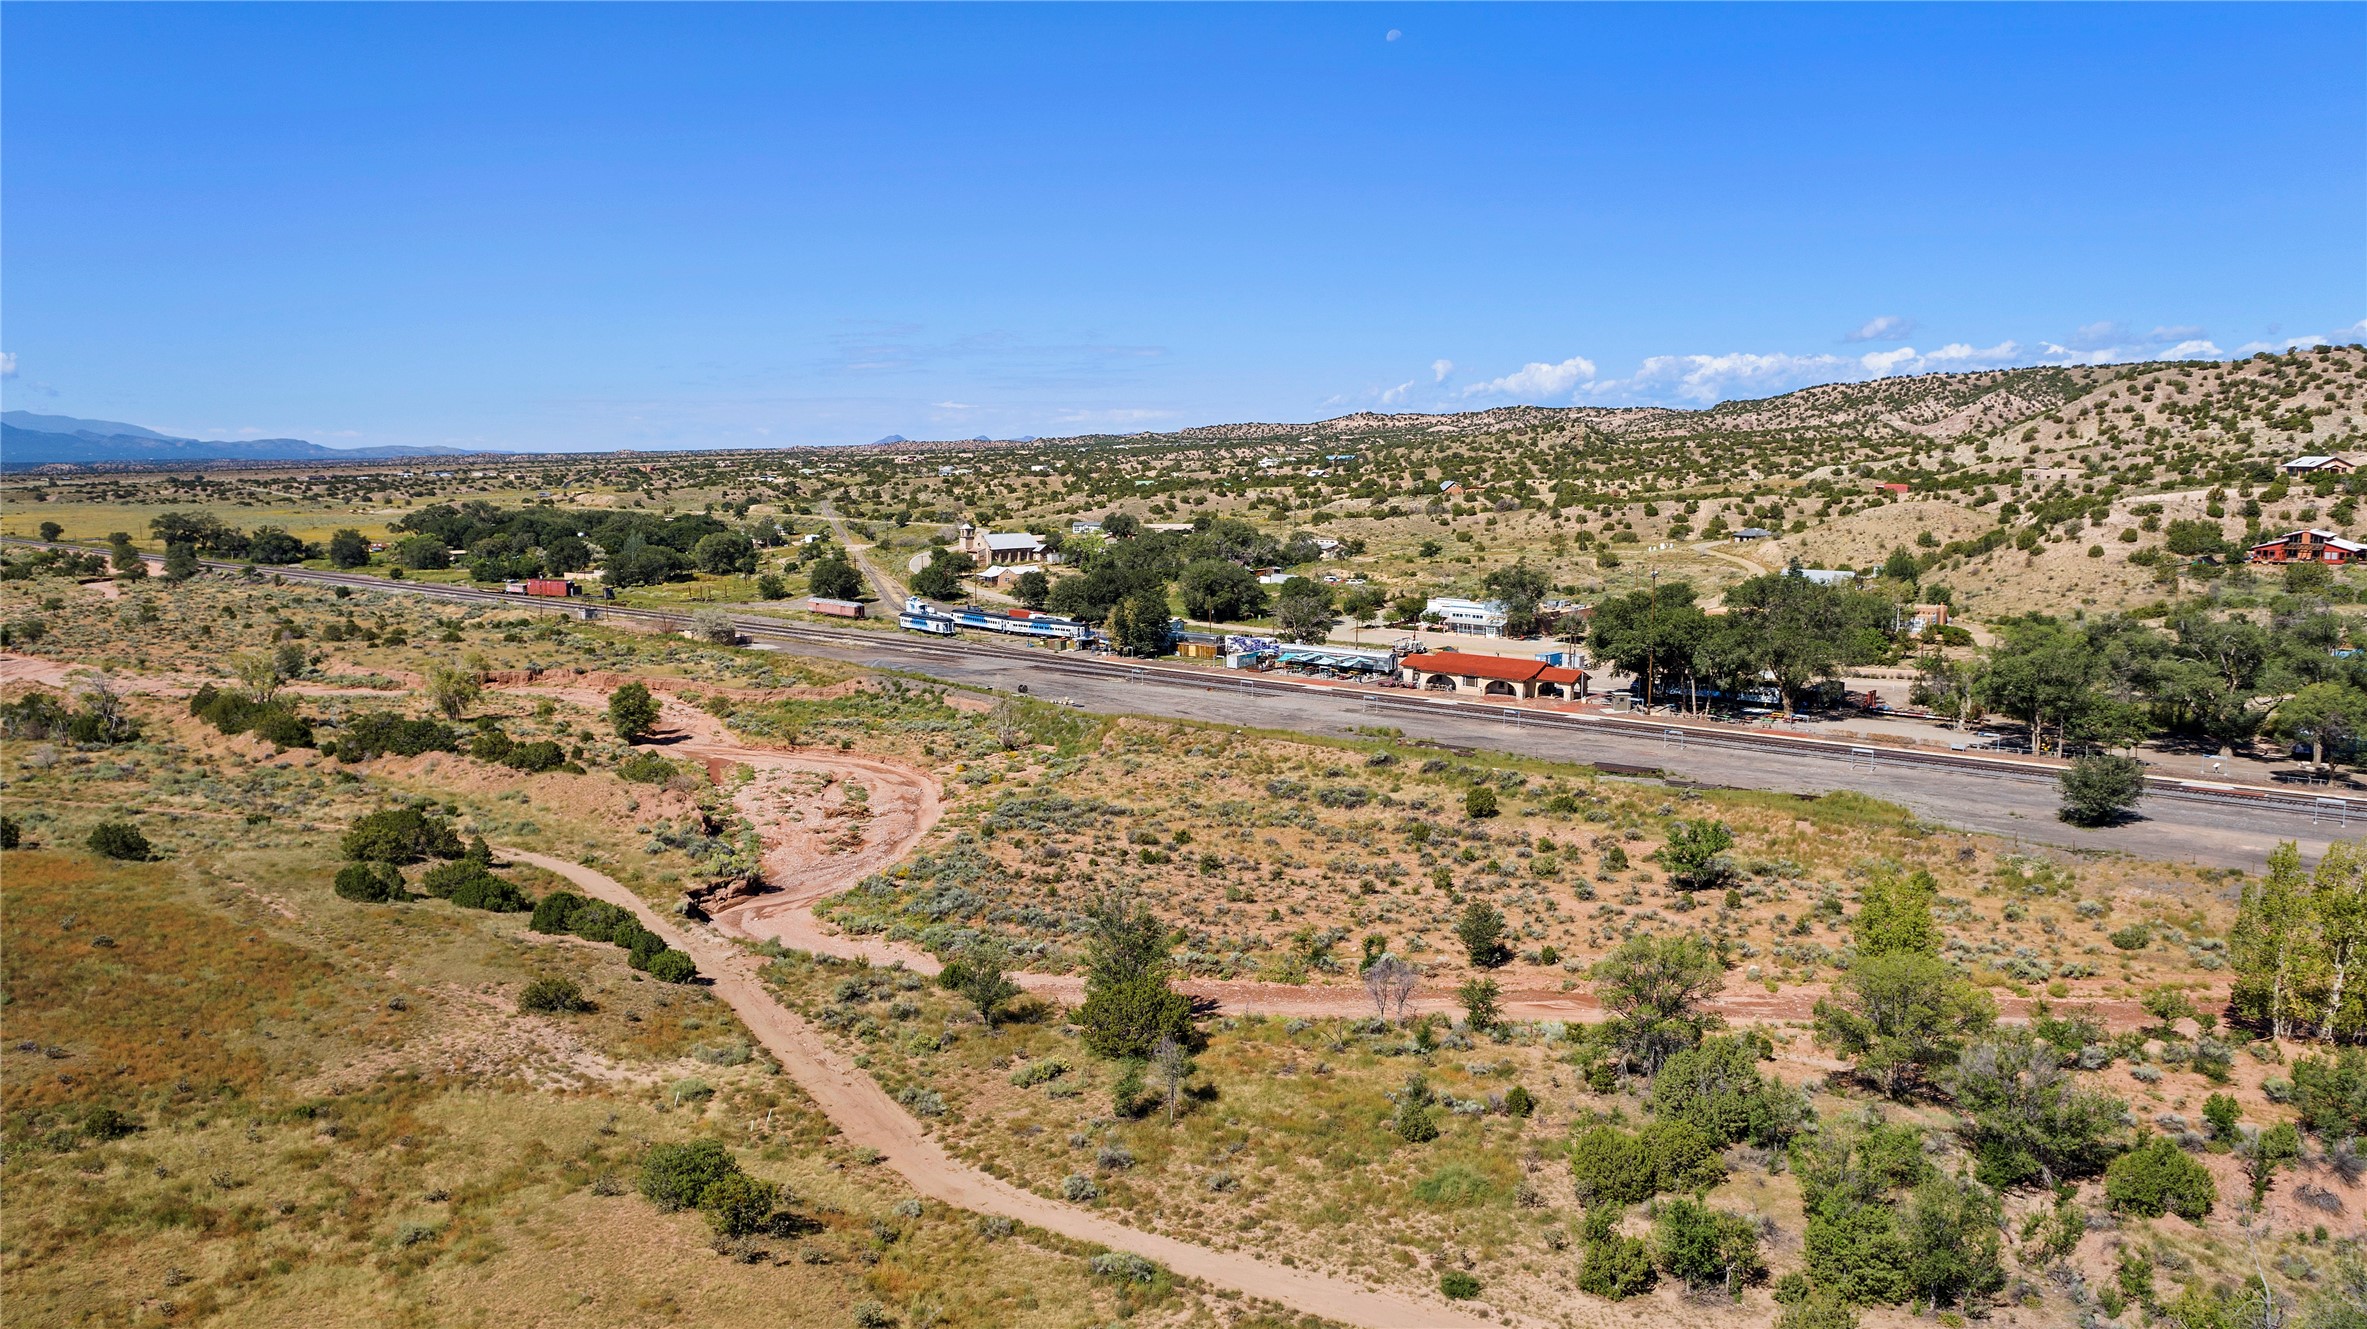 210 River Bank Rd and the J.F. Miller, Lamy, New Mexico 87540, 4 Bedrooms Bedrooms, ,4 BathroomsBathrooms,Farm,For Sale,River Bank Rd and the J.F. Miller,202200241